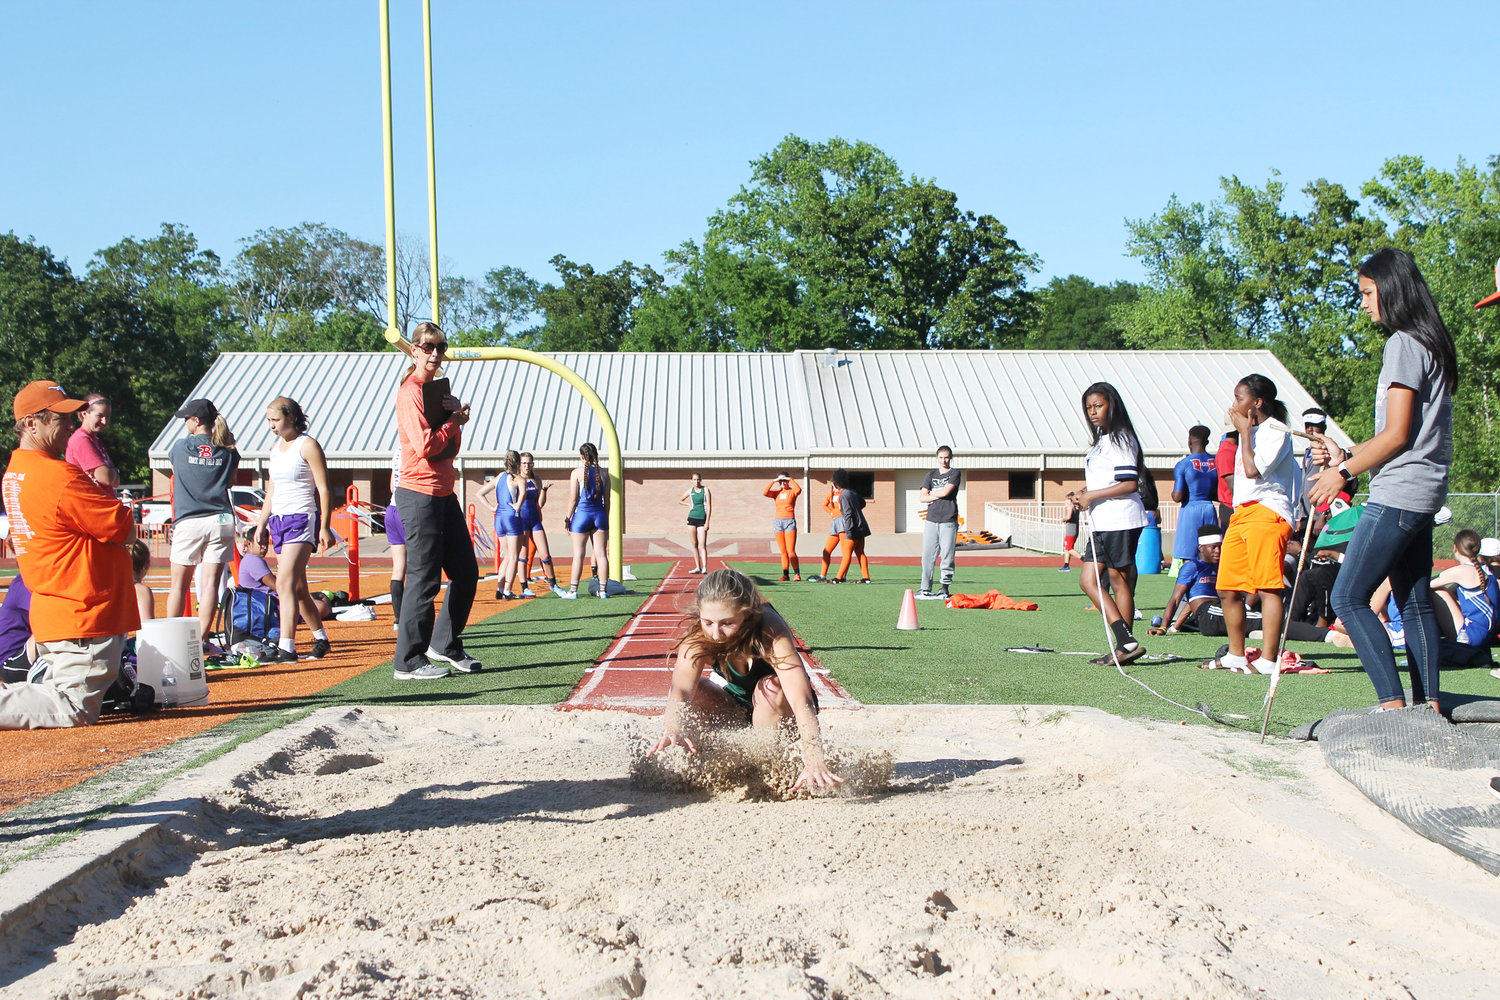 A Canton competitor digs deep for her landing in the Long Jump in Thursday’s track meet in Mineola.